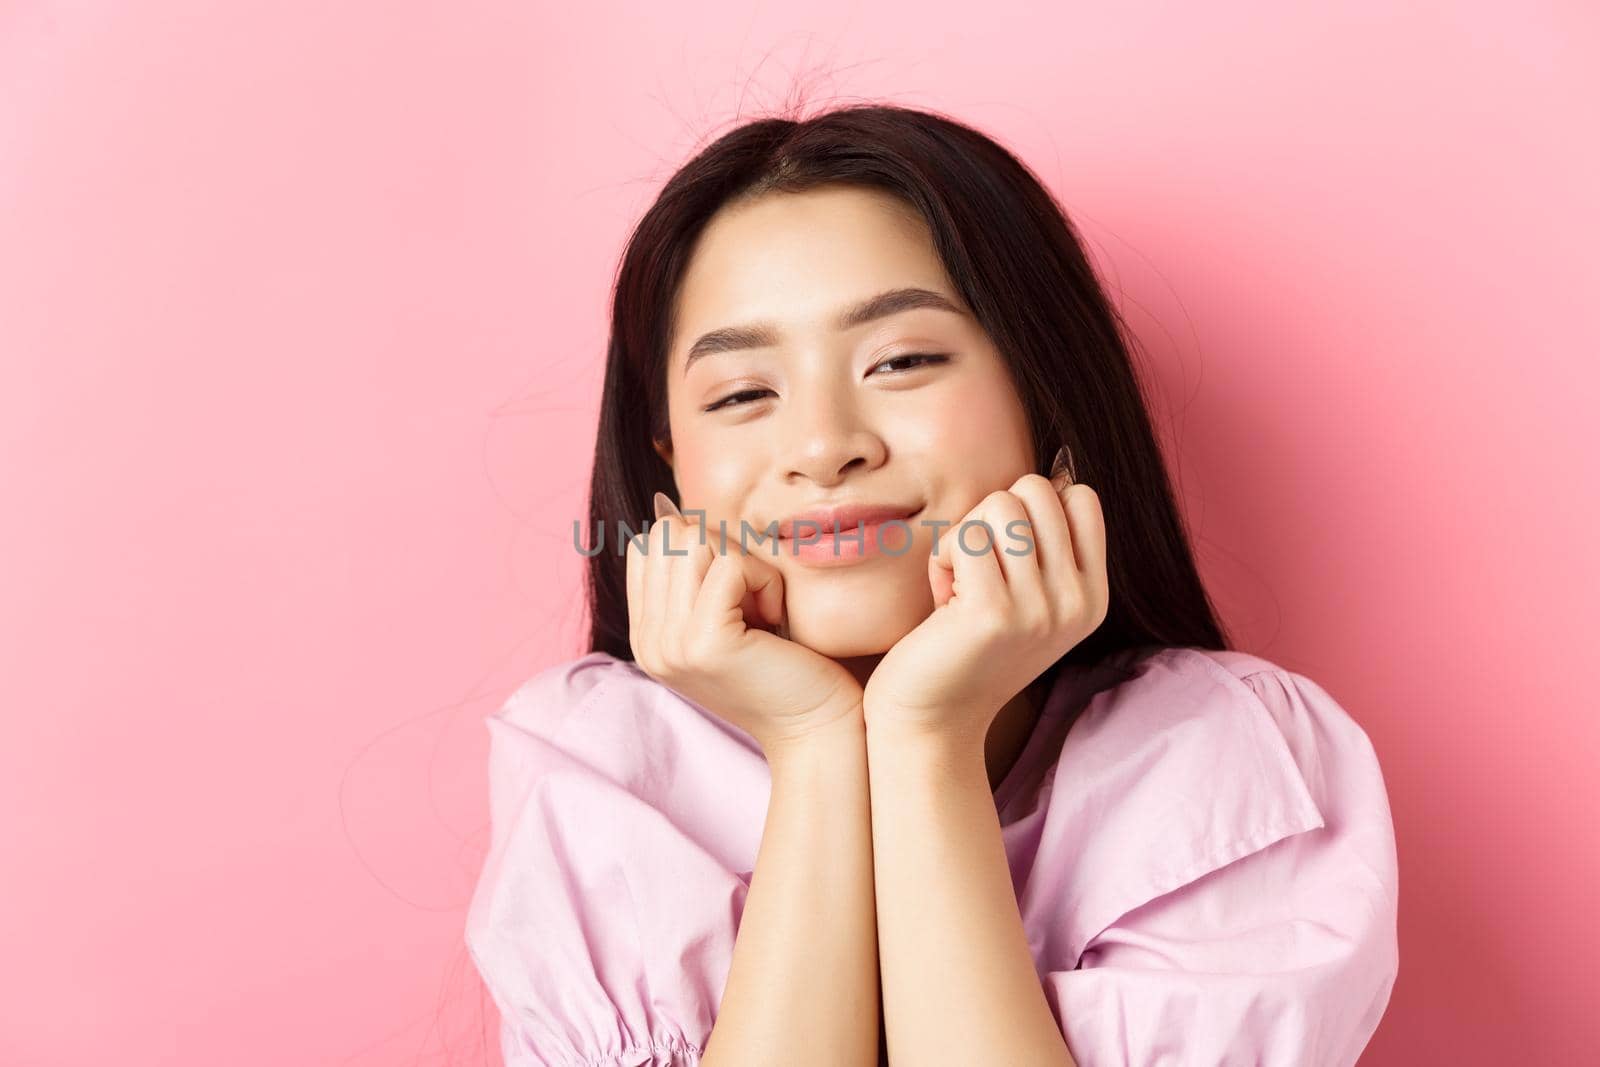 Close-up portrait of dreamy and romantic asian girl, lean face on hands and smiling, looking with admiration and happiness, standing against pink background.